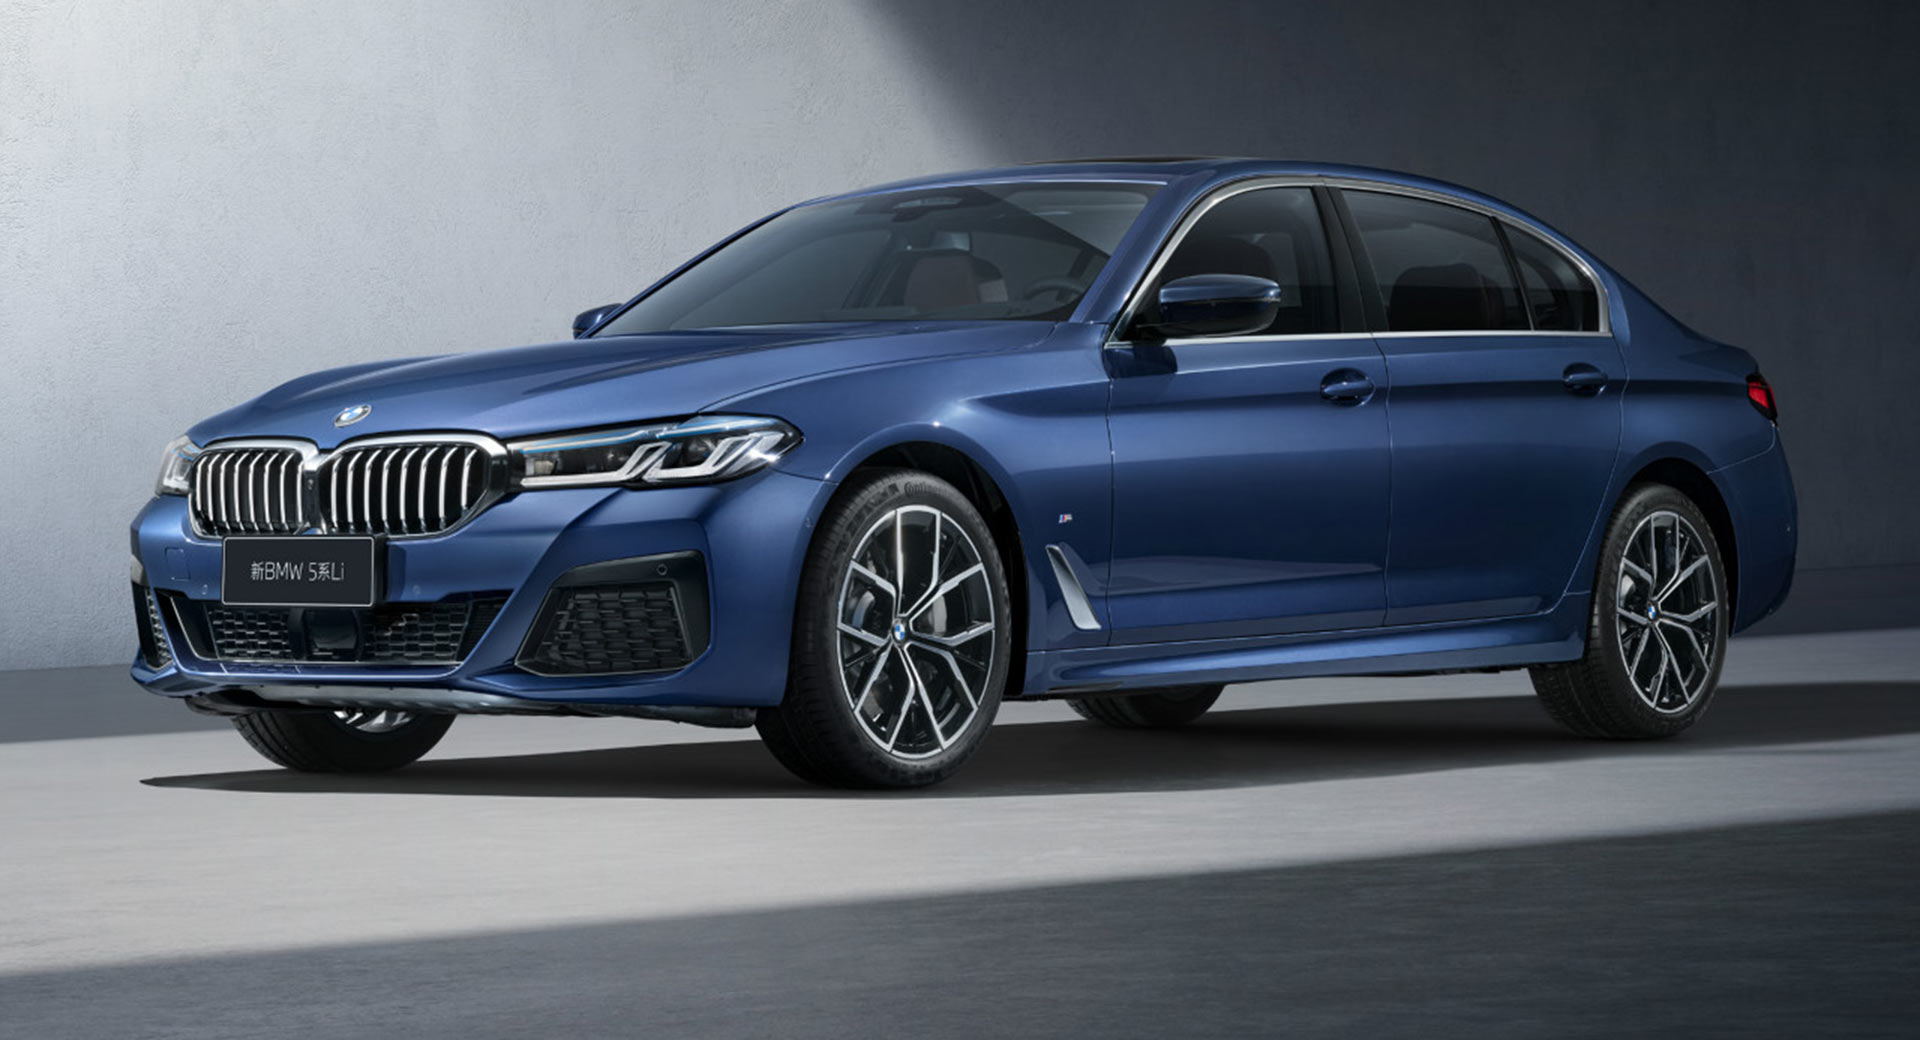 2021 BMW 5Series Lands In China With Long Wheelbase And